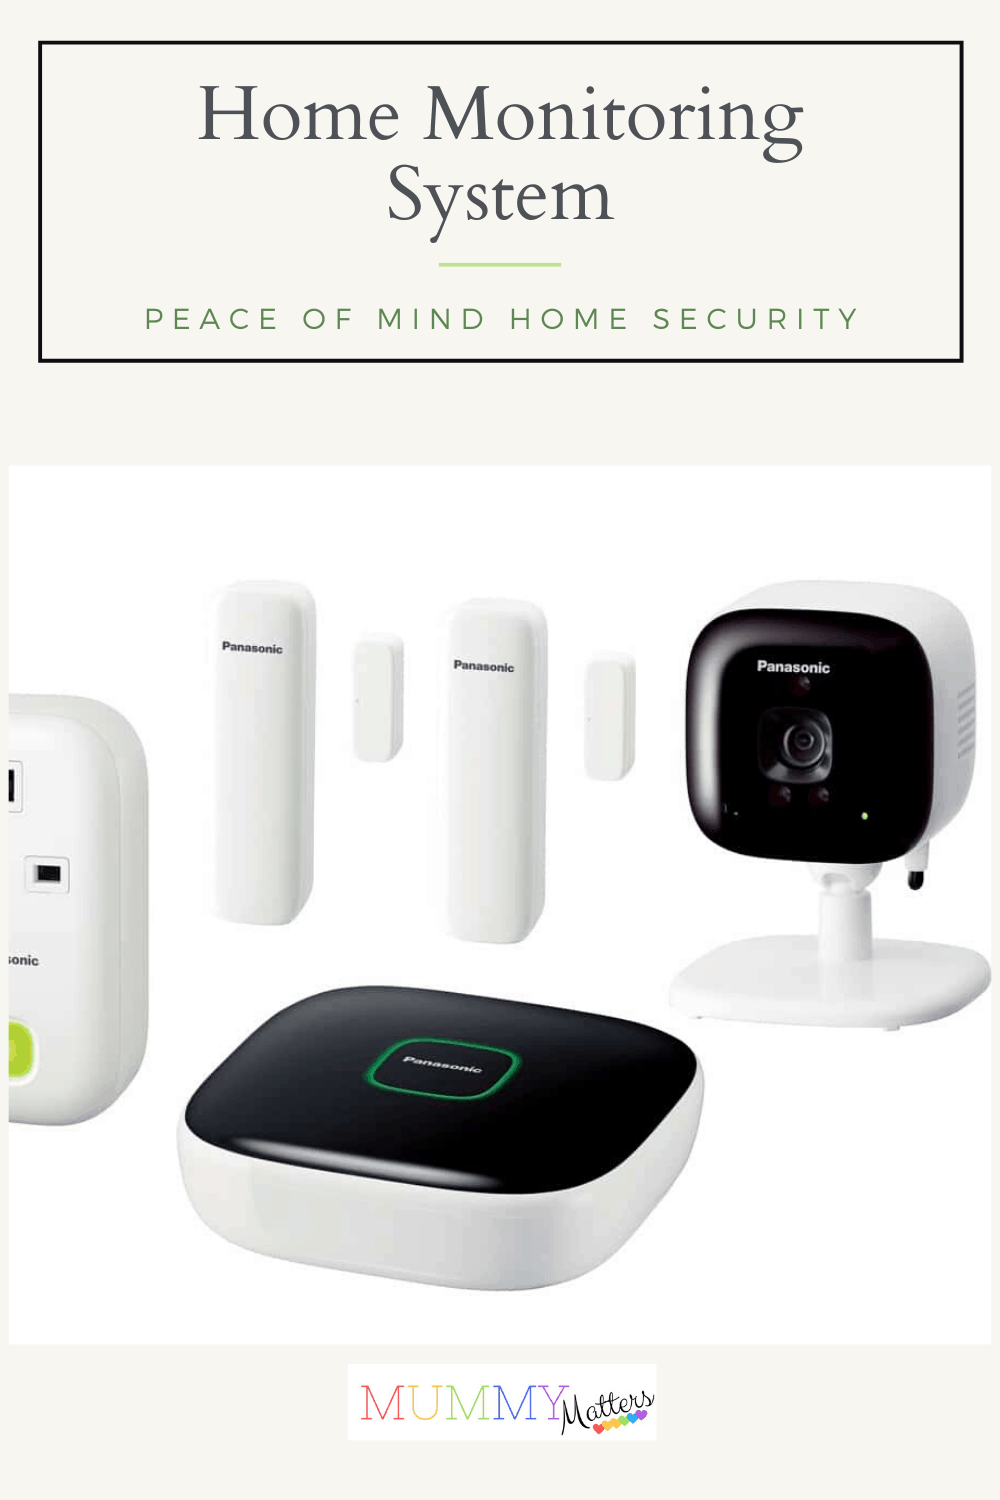 We tell children we have eyes everywhere but we know that's not the case. It's not possible, is it? With a Home Monitoring System, you really can.